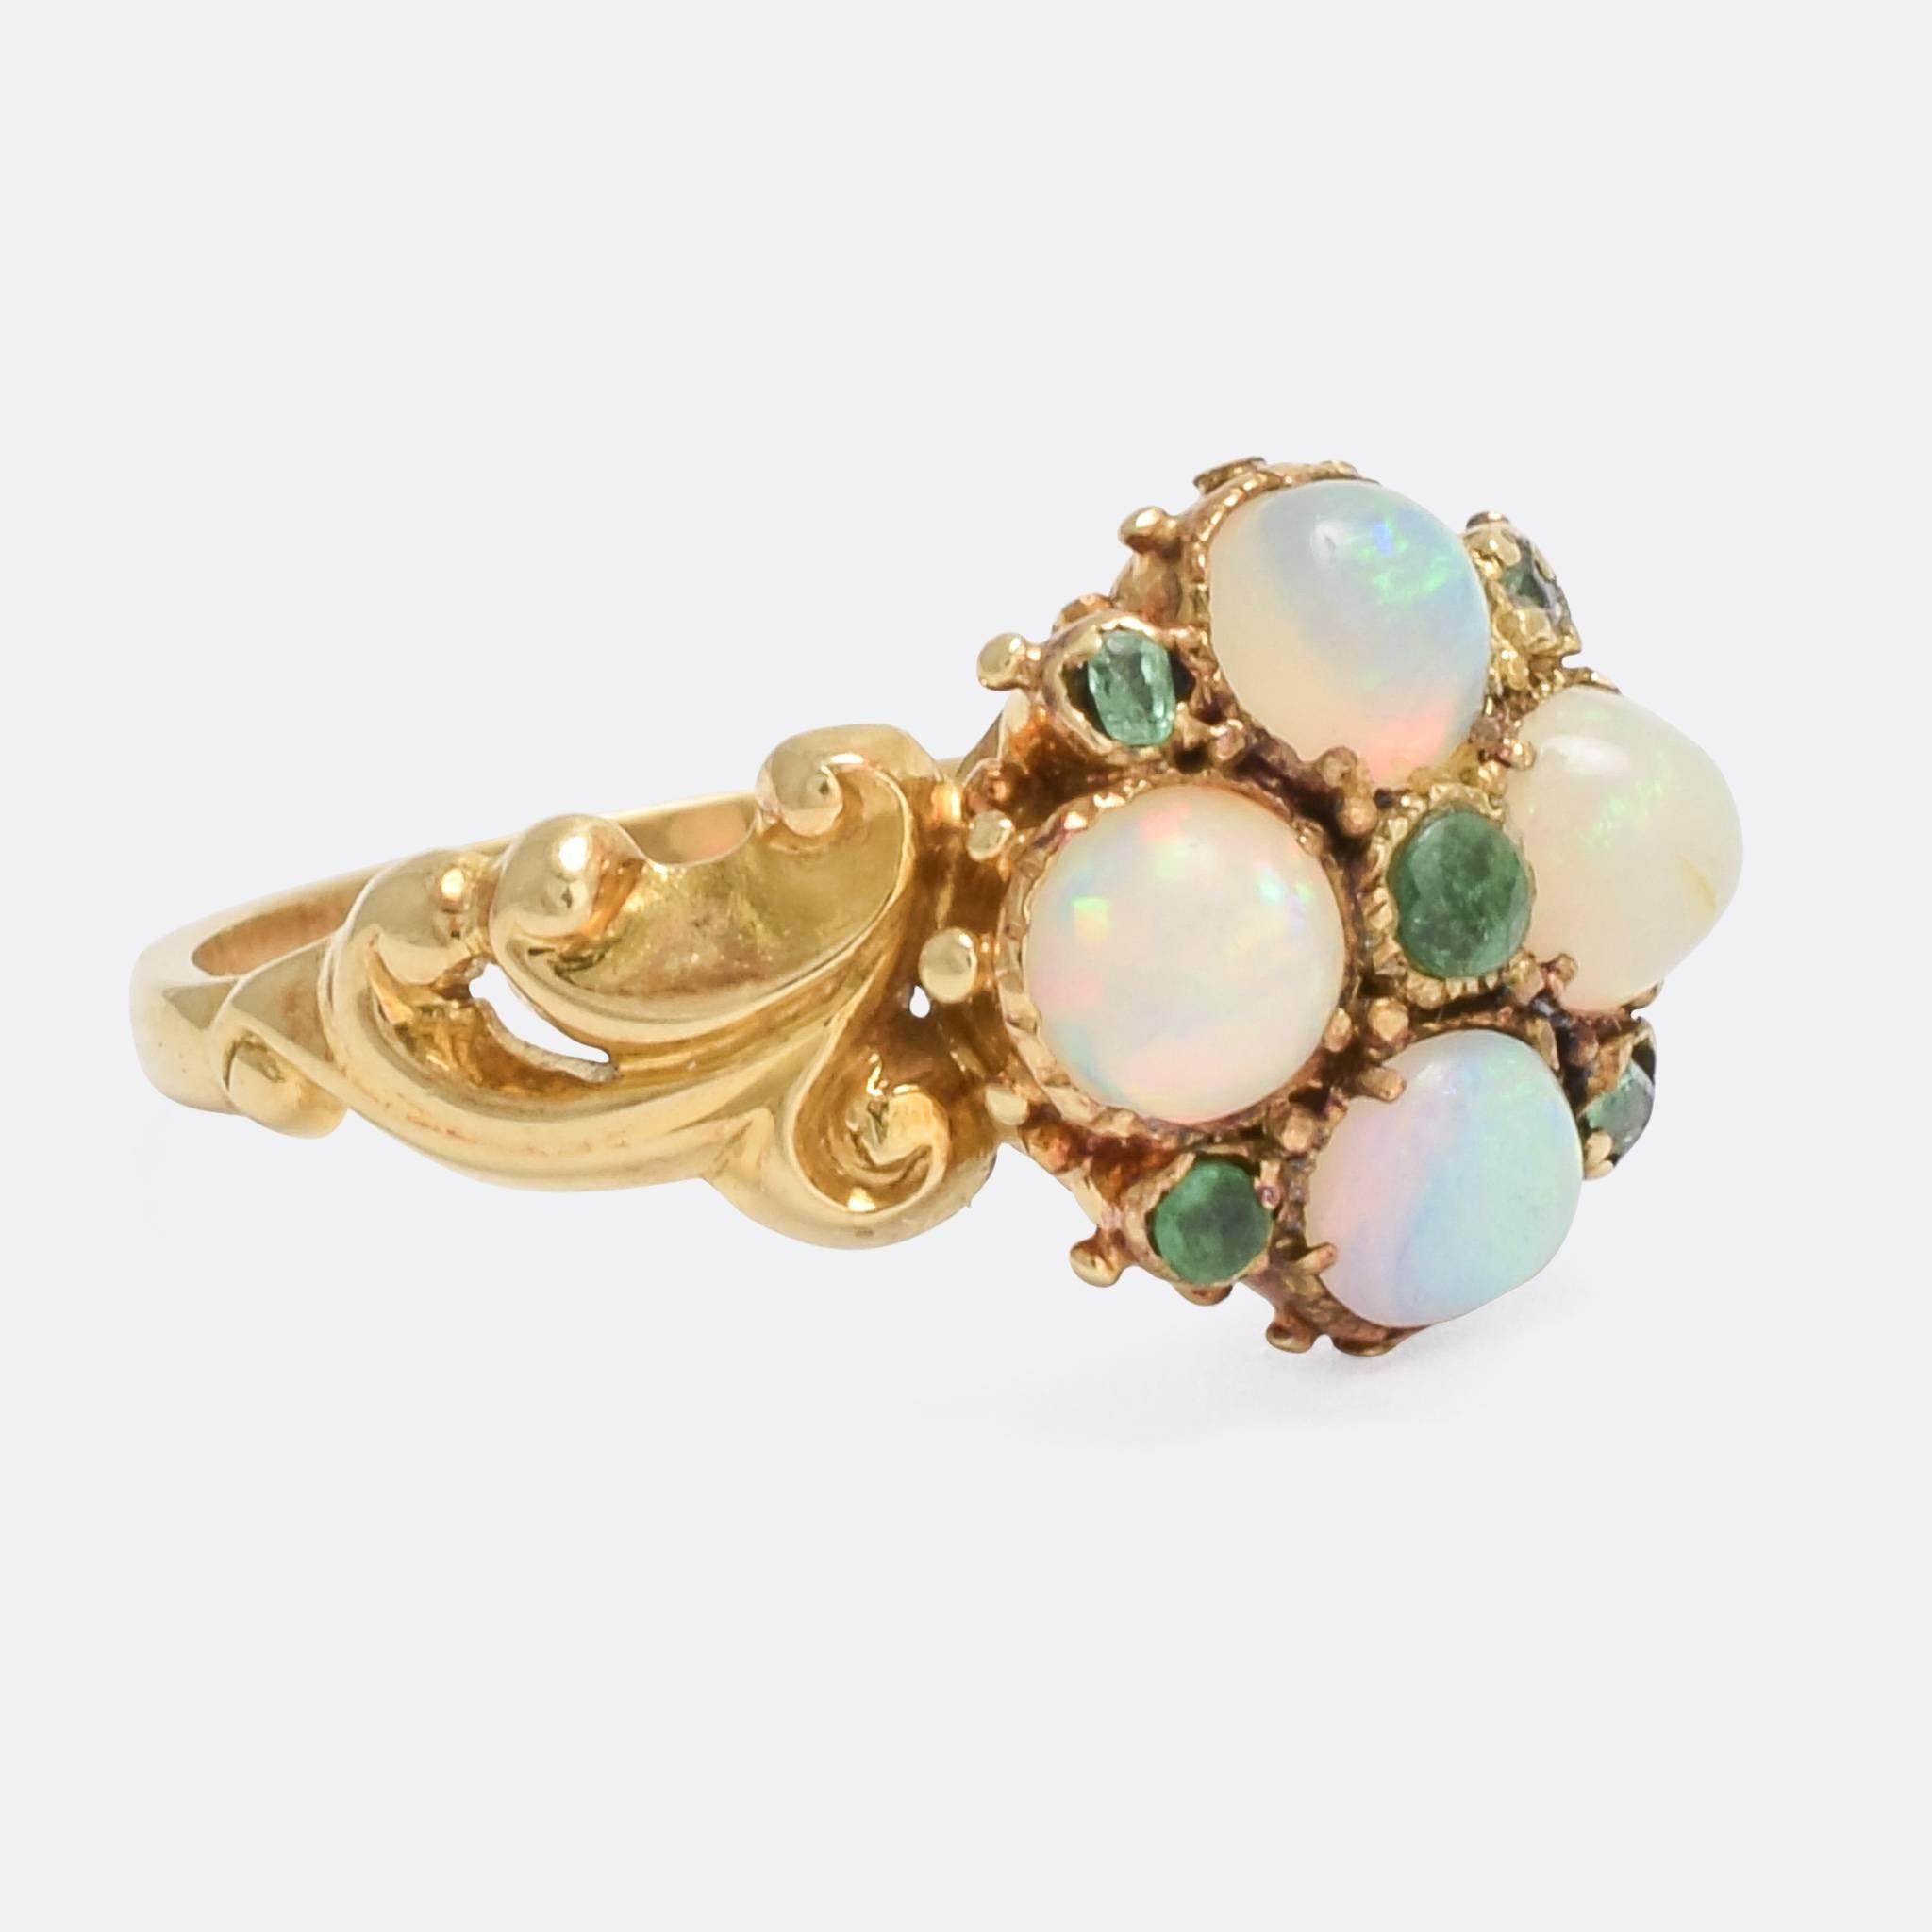 A particularly lovely antique cluster ring, set with four vibrant opal cabochons and five natural emeralds. The shoulders are adorned with deeply chased, asymetrical scrolling - while the head is finished with little gold pomels, very typical of the